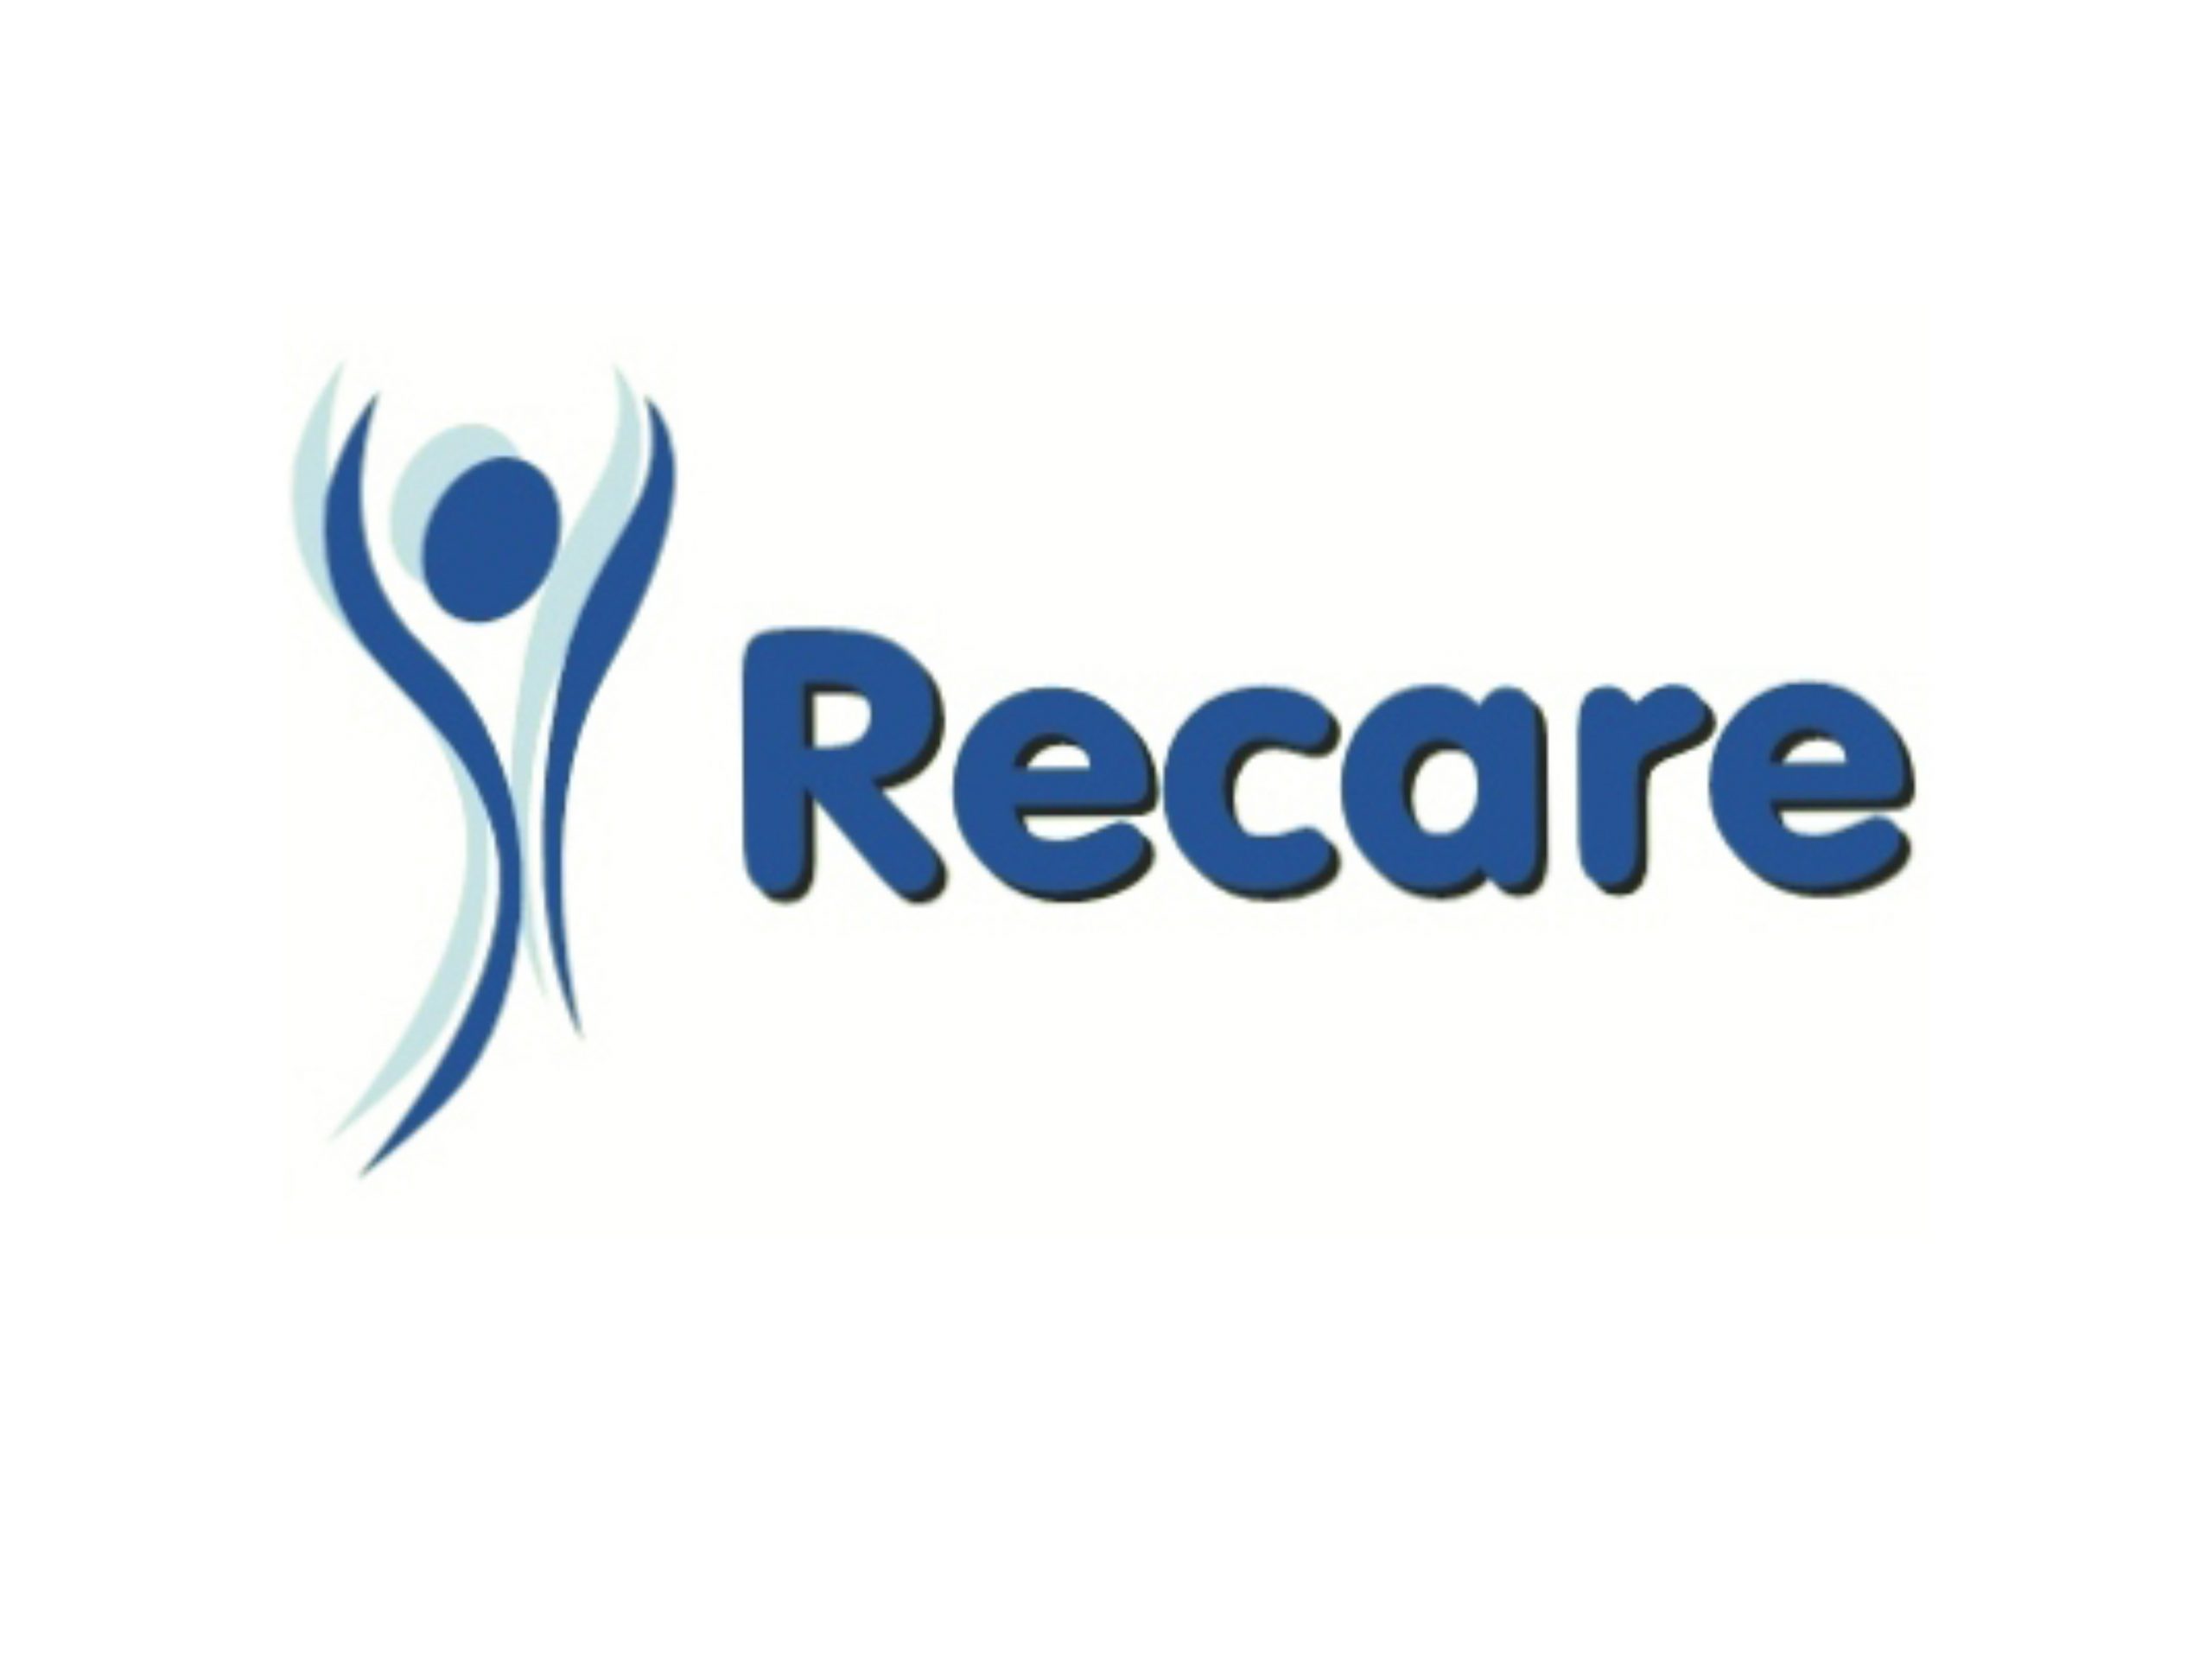 Recare on-stand ‘express’ seminars to deliver expert mobility advice at Naidex